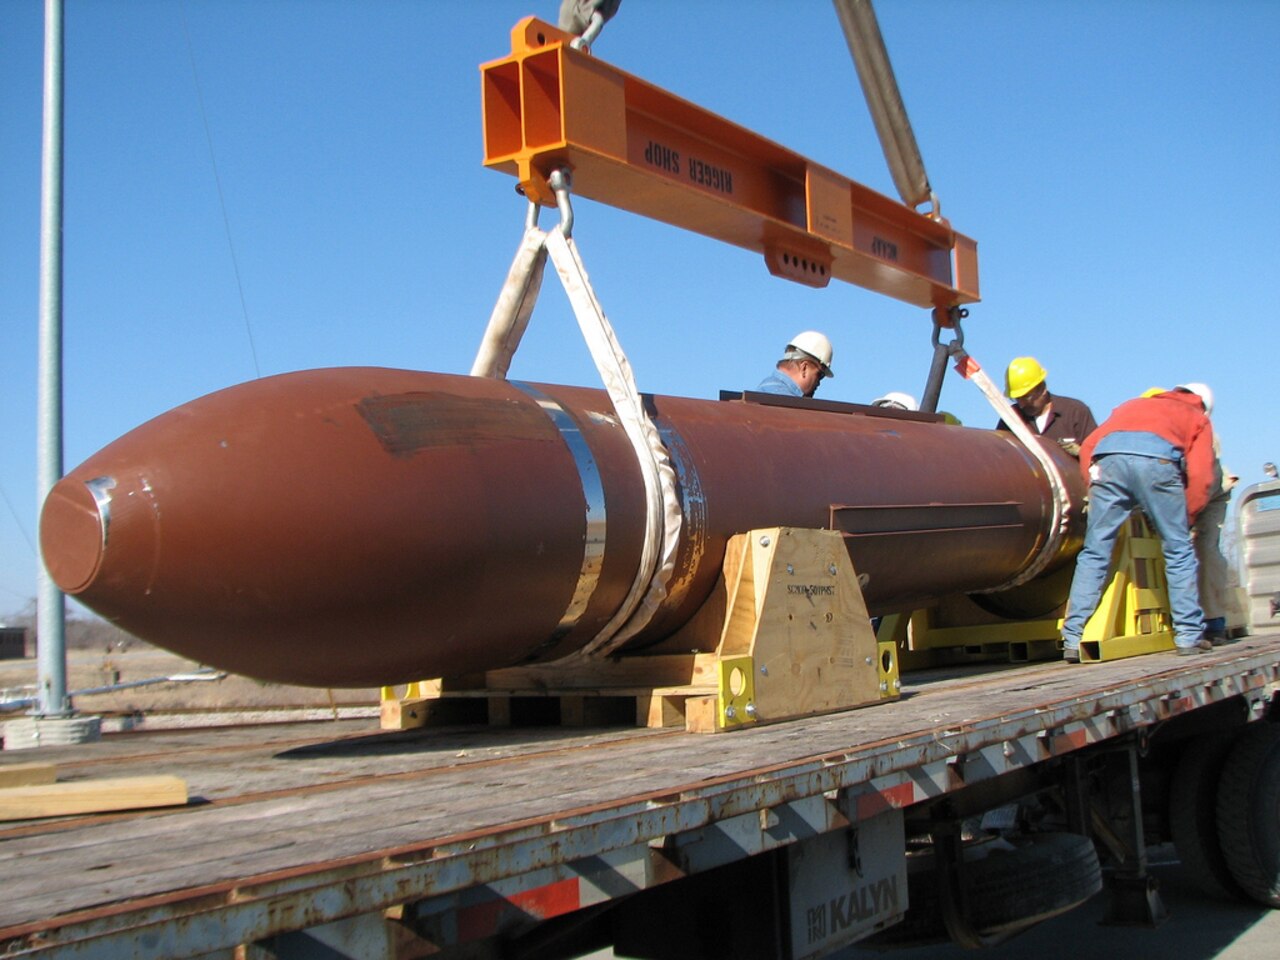 Defense Threat Reduction Agency test personnel prepare to carefully offload the 30,000-pound massive ordnance penetrator, or MOP, for a static test at White Sands Missile Range, N.M. DTRA photo